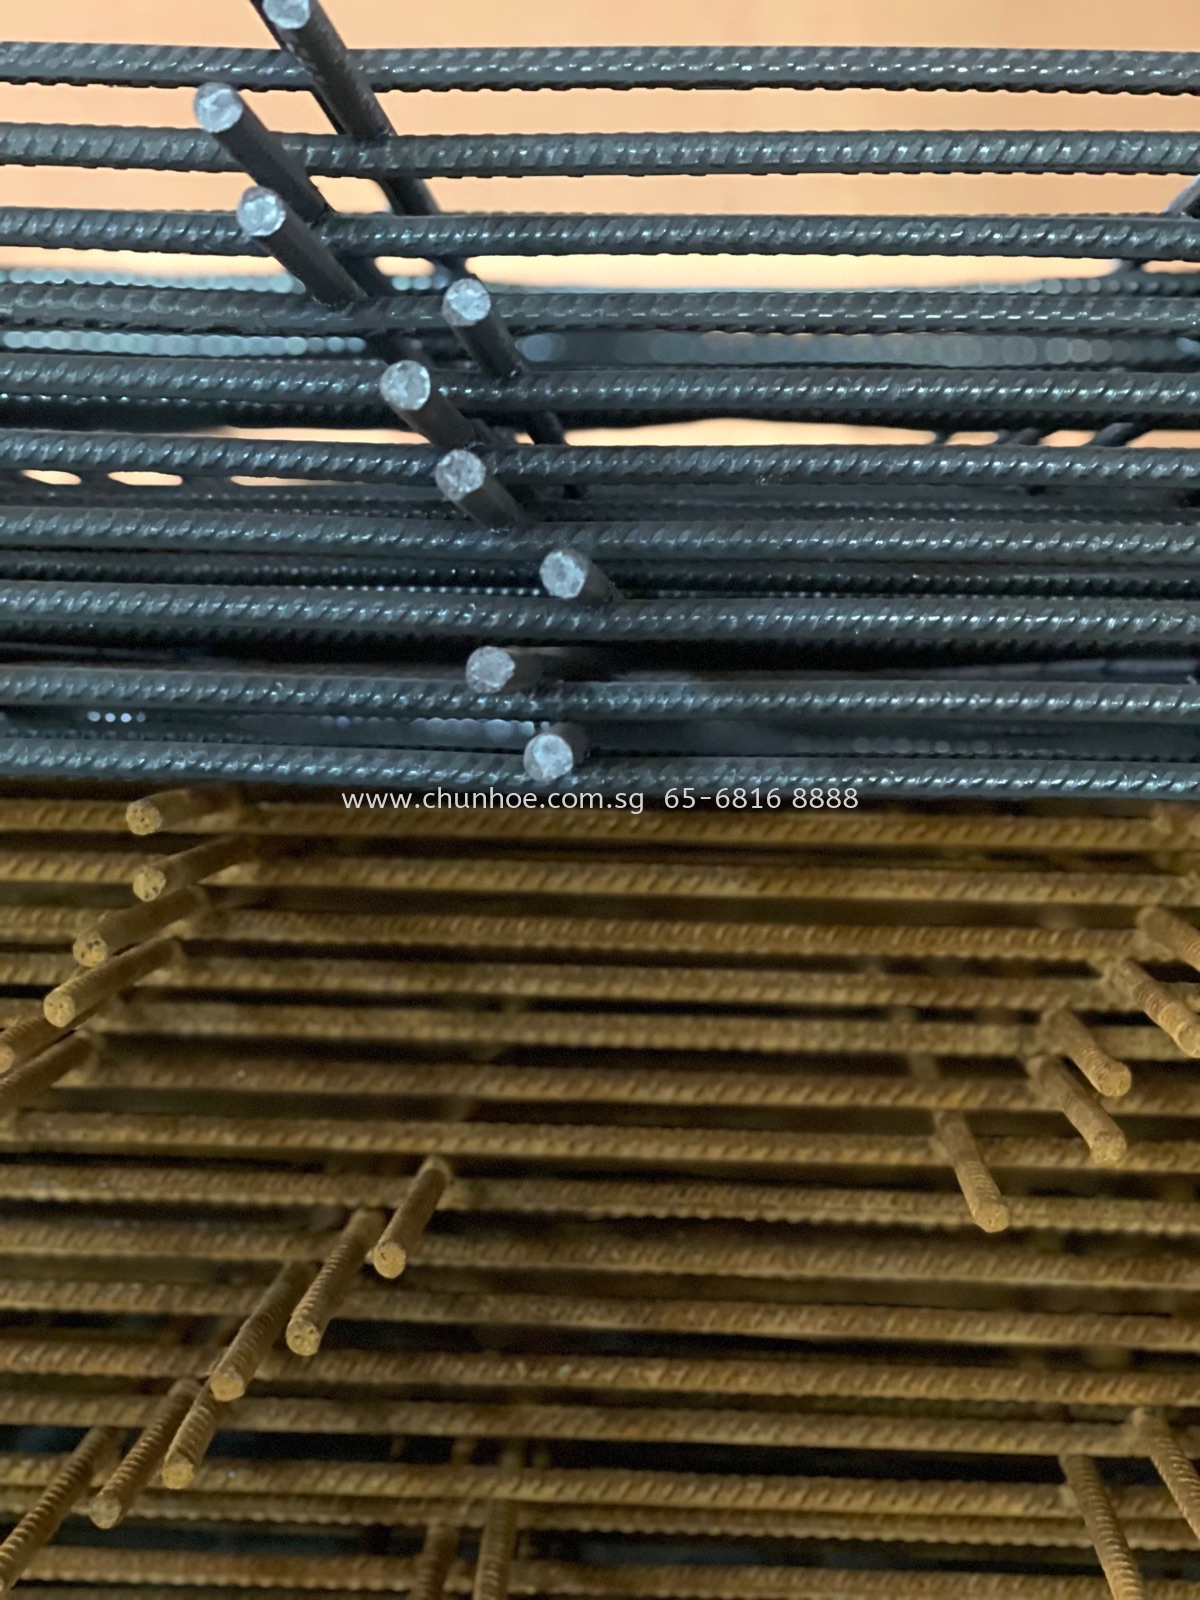 #wiremesh #fence #brc #brcfence #steel #wire #reinforcing #product 